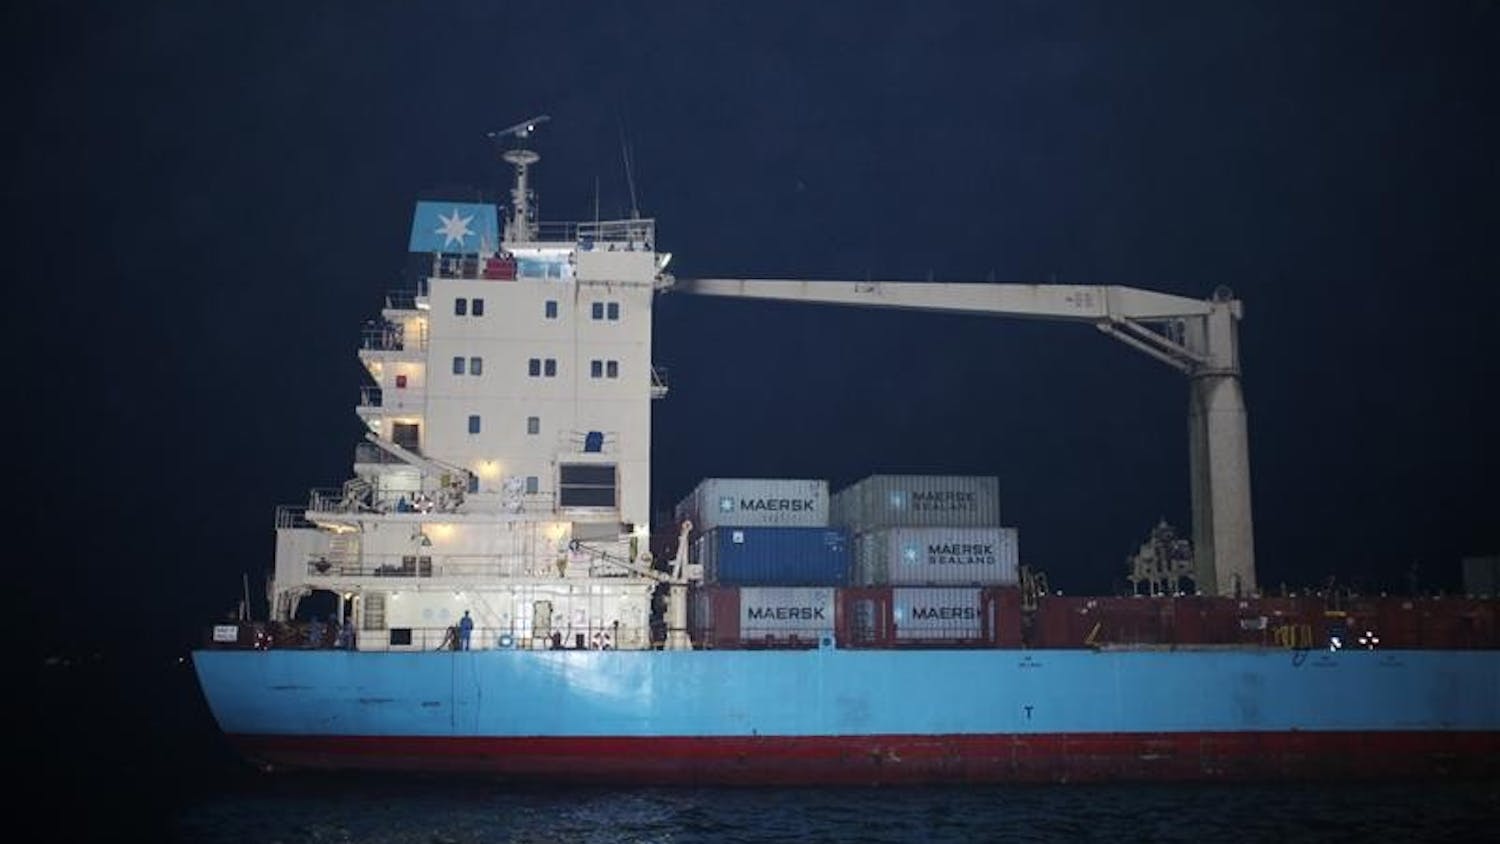 The American ship, the Maersk Alabama, whose captain remains held hostage by Somali pirates, arrives Saturday in Mombasa, Kenya, with the 19 remaining crew members aboard. Capt. Richard Phillips is still being held in the lifeboat hundreds of miles from land. U.S. warships are nearby monitoring the situation. The U.S.-flagged ship was attacked by Somali pirates firing automatic weapons Wednesday but its unarmed crew locked themselves in a secure room and then overpowered one of the pirates.